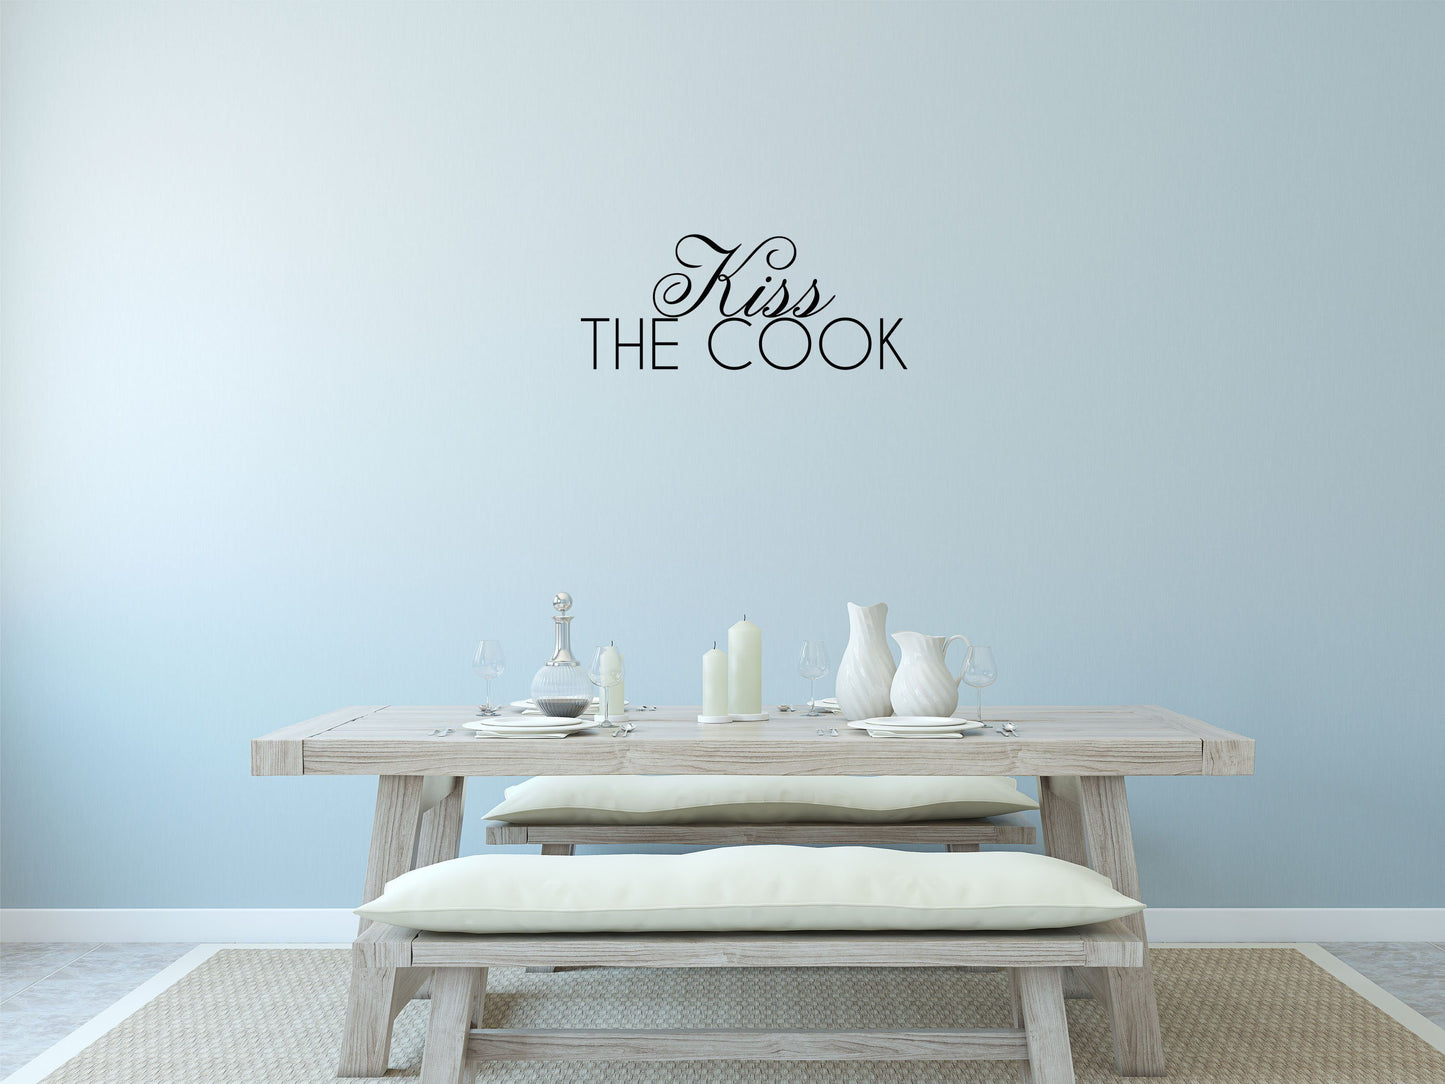 Kiss The Cook Wall Decal - Kiss The Cook Decal - Kitchen Wall Art - Kitchen Wall Decal - Kiss The Cook Wall Decor Vinyl Wall Decal Done 